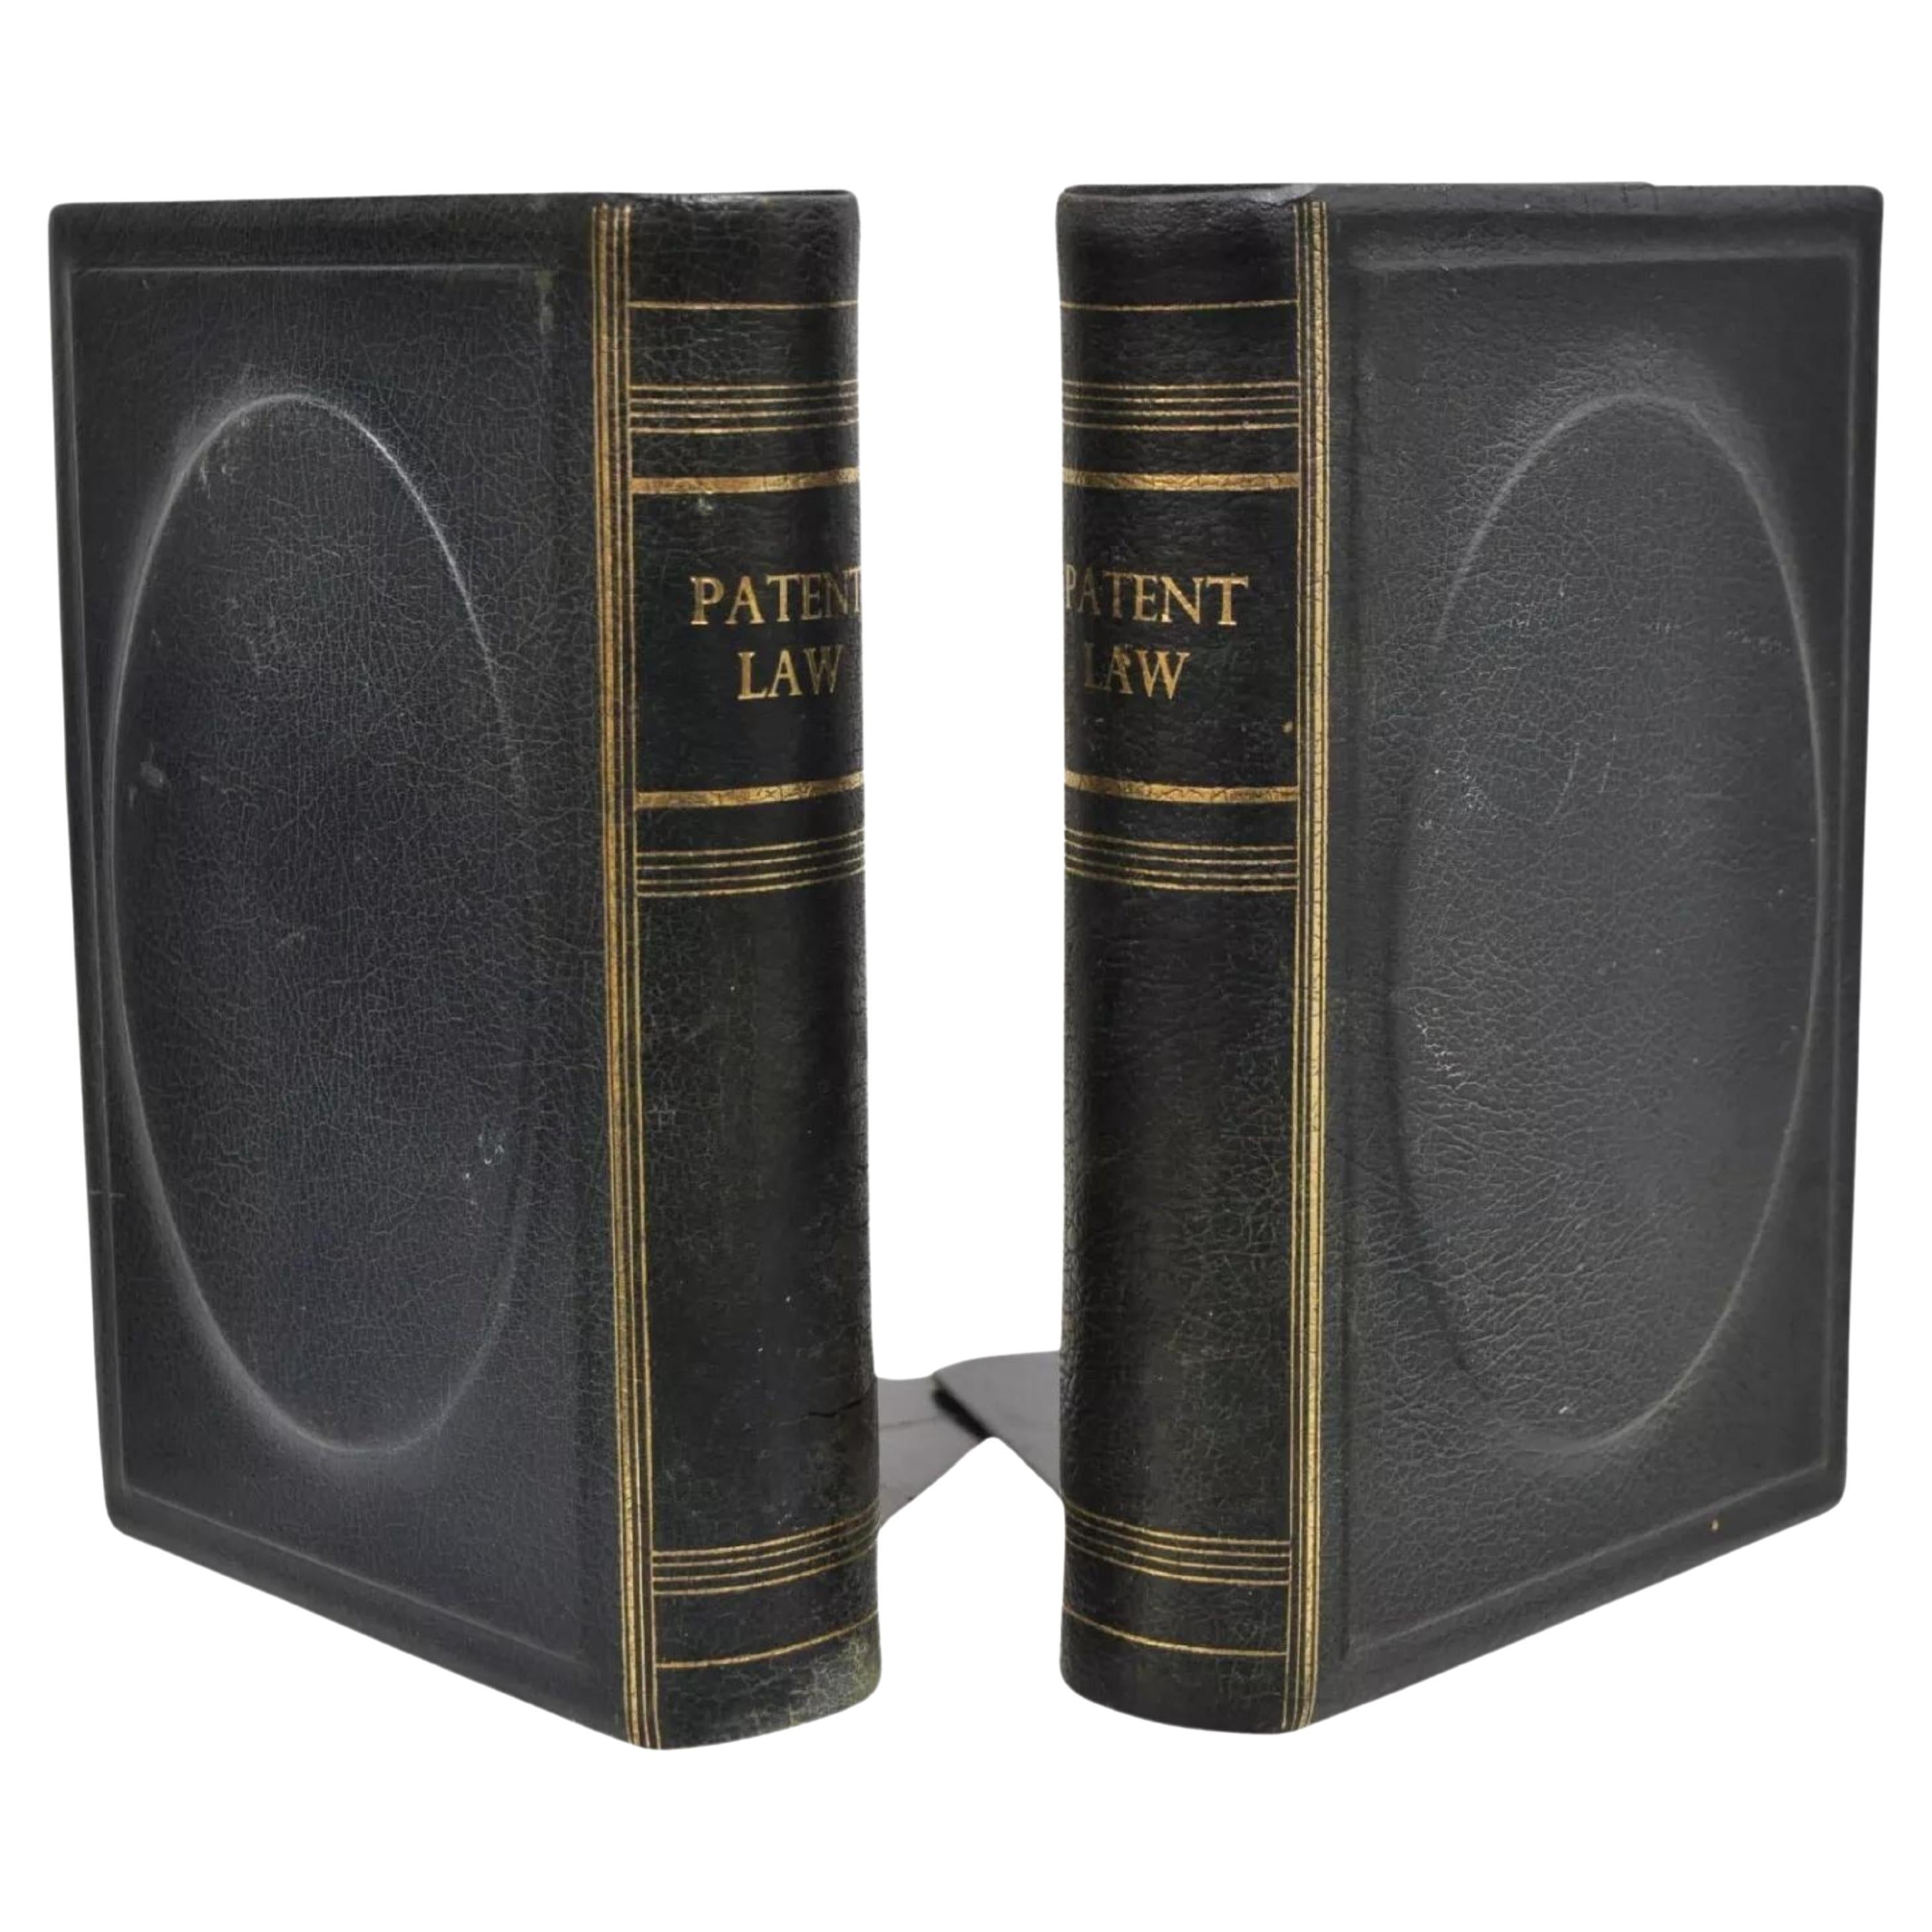 Vintage Italian Blue Leather Bound "Patent Law" Faux Book Bookends (A) - Pair For Sale